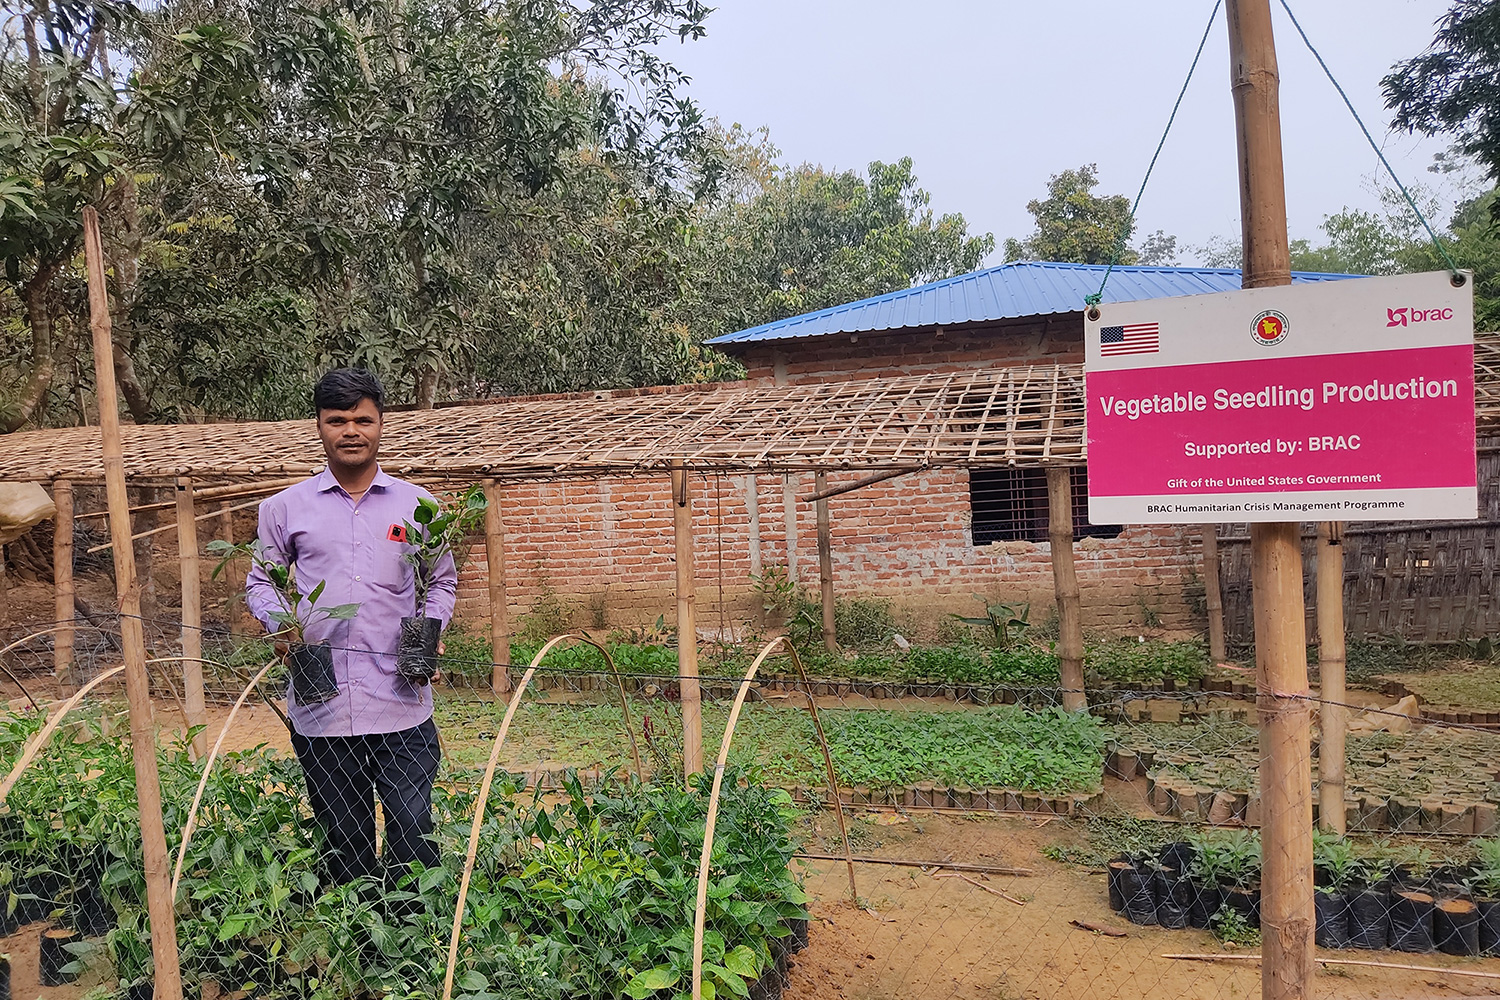 Ismail, a resident of Cox's Bazar, Bangladesh, whose community is hosting nearly a million Rohingya refugees, stands in his garden where he grows vegetables and nurses seedlings thanks to support from BRAC and the U.S. Department of State.